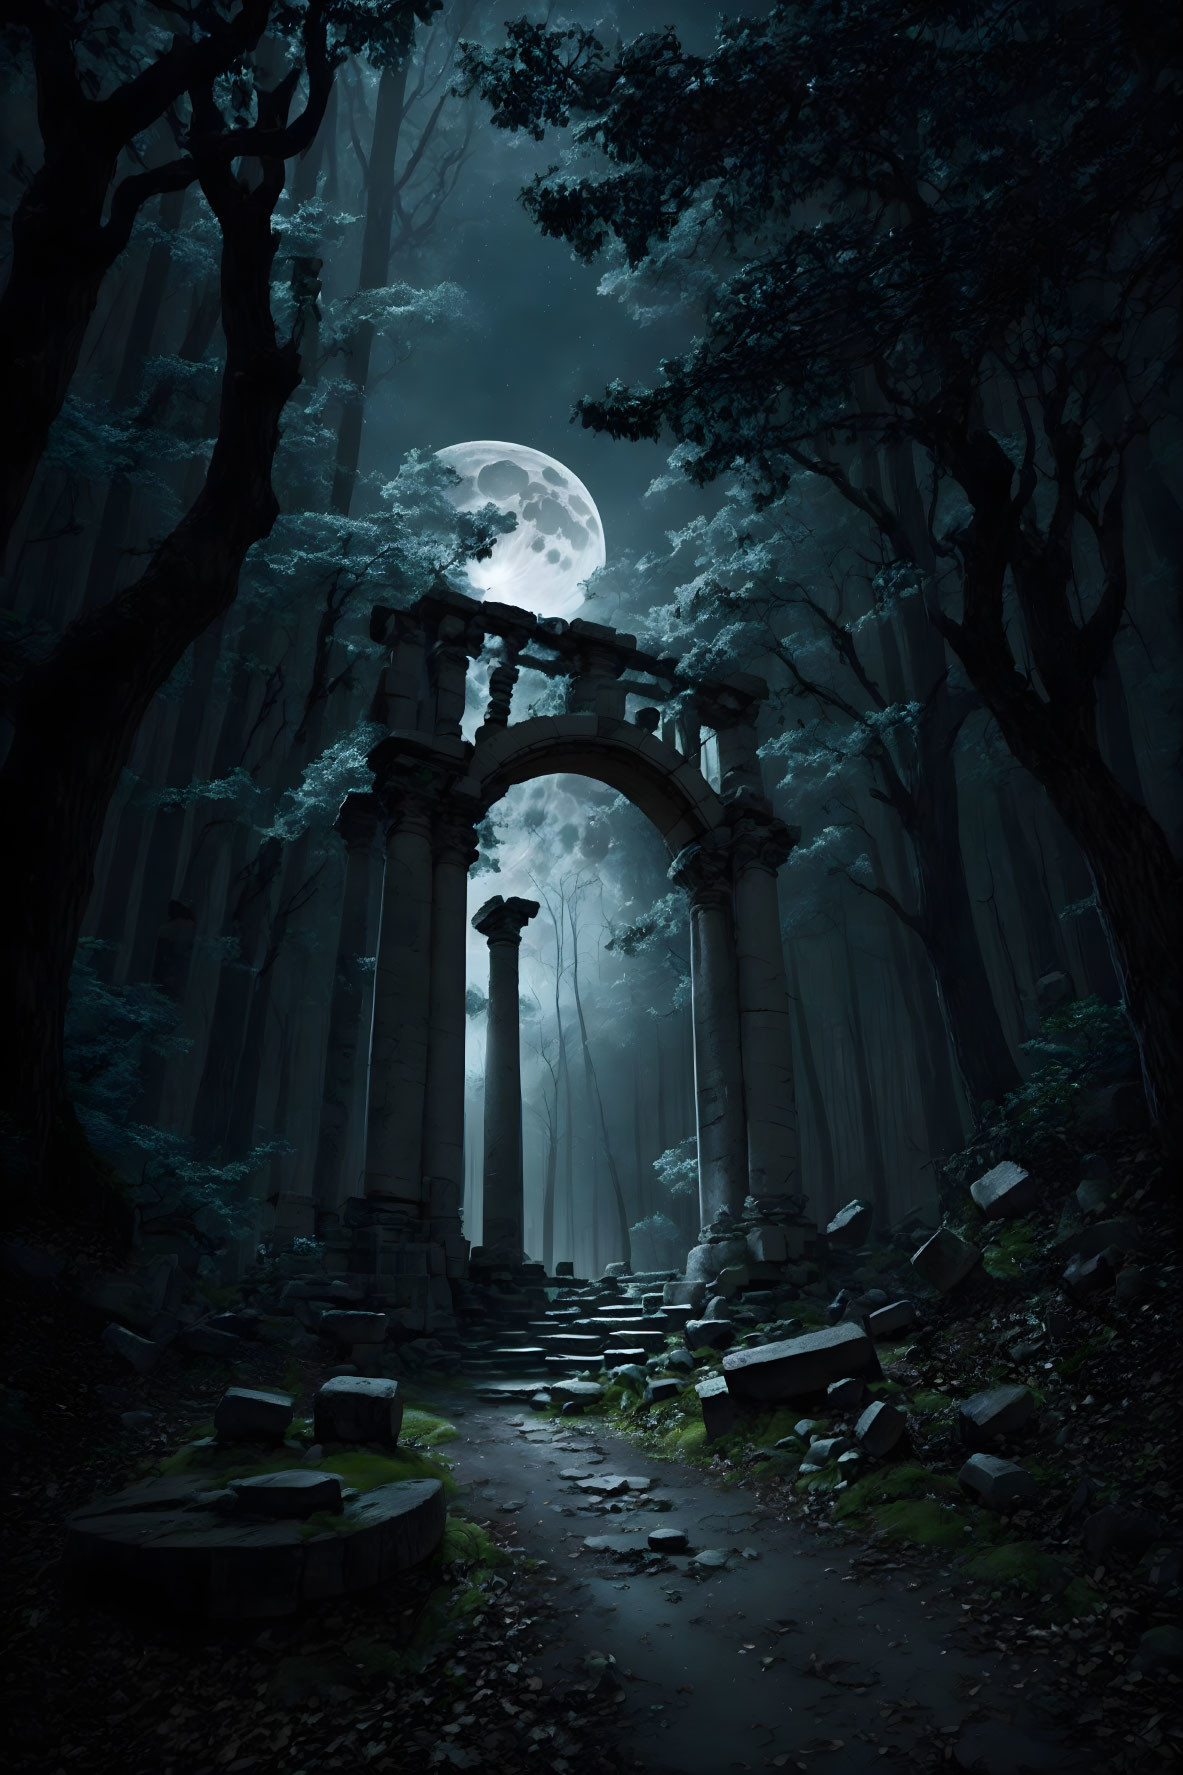 Ruins in the forest under the moonlight